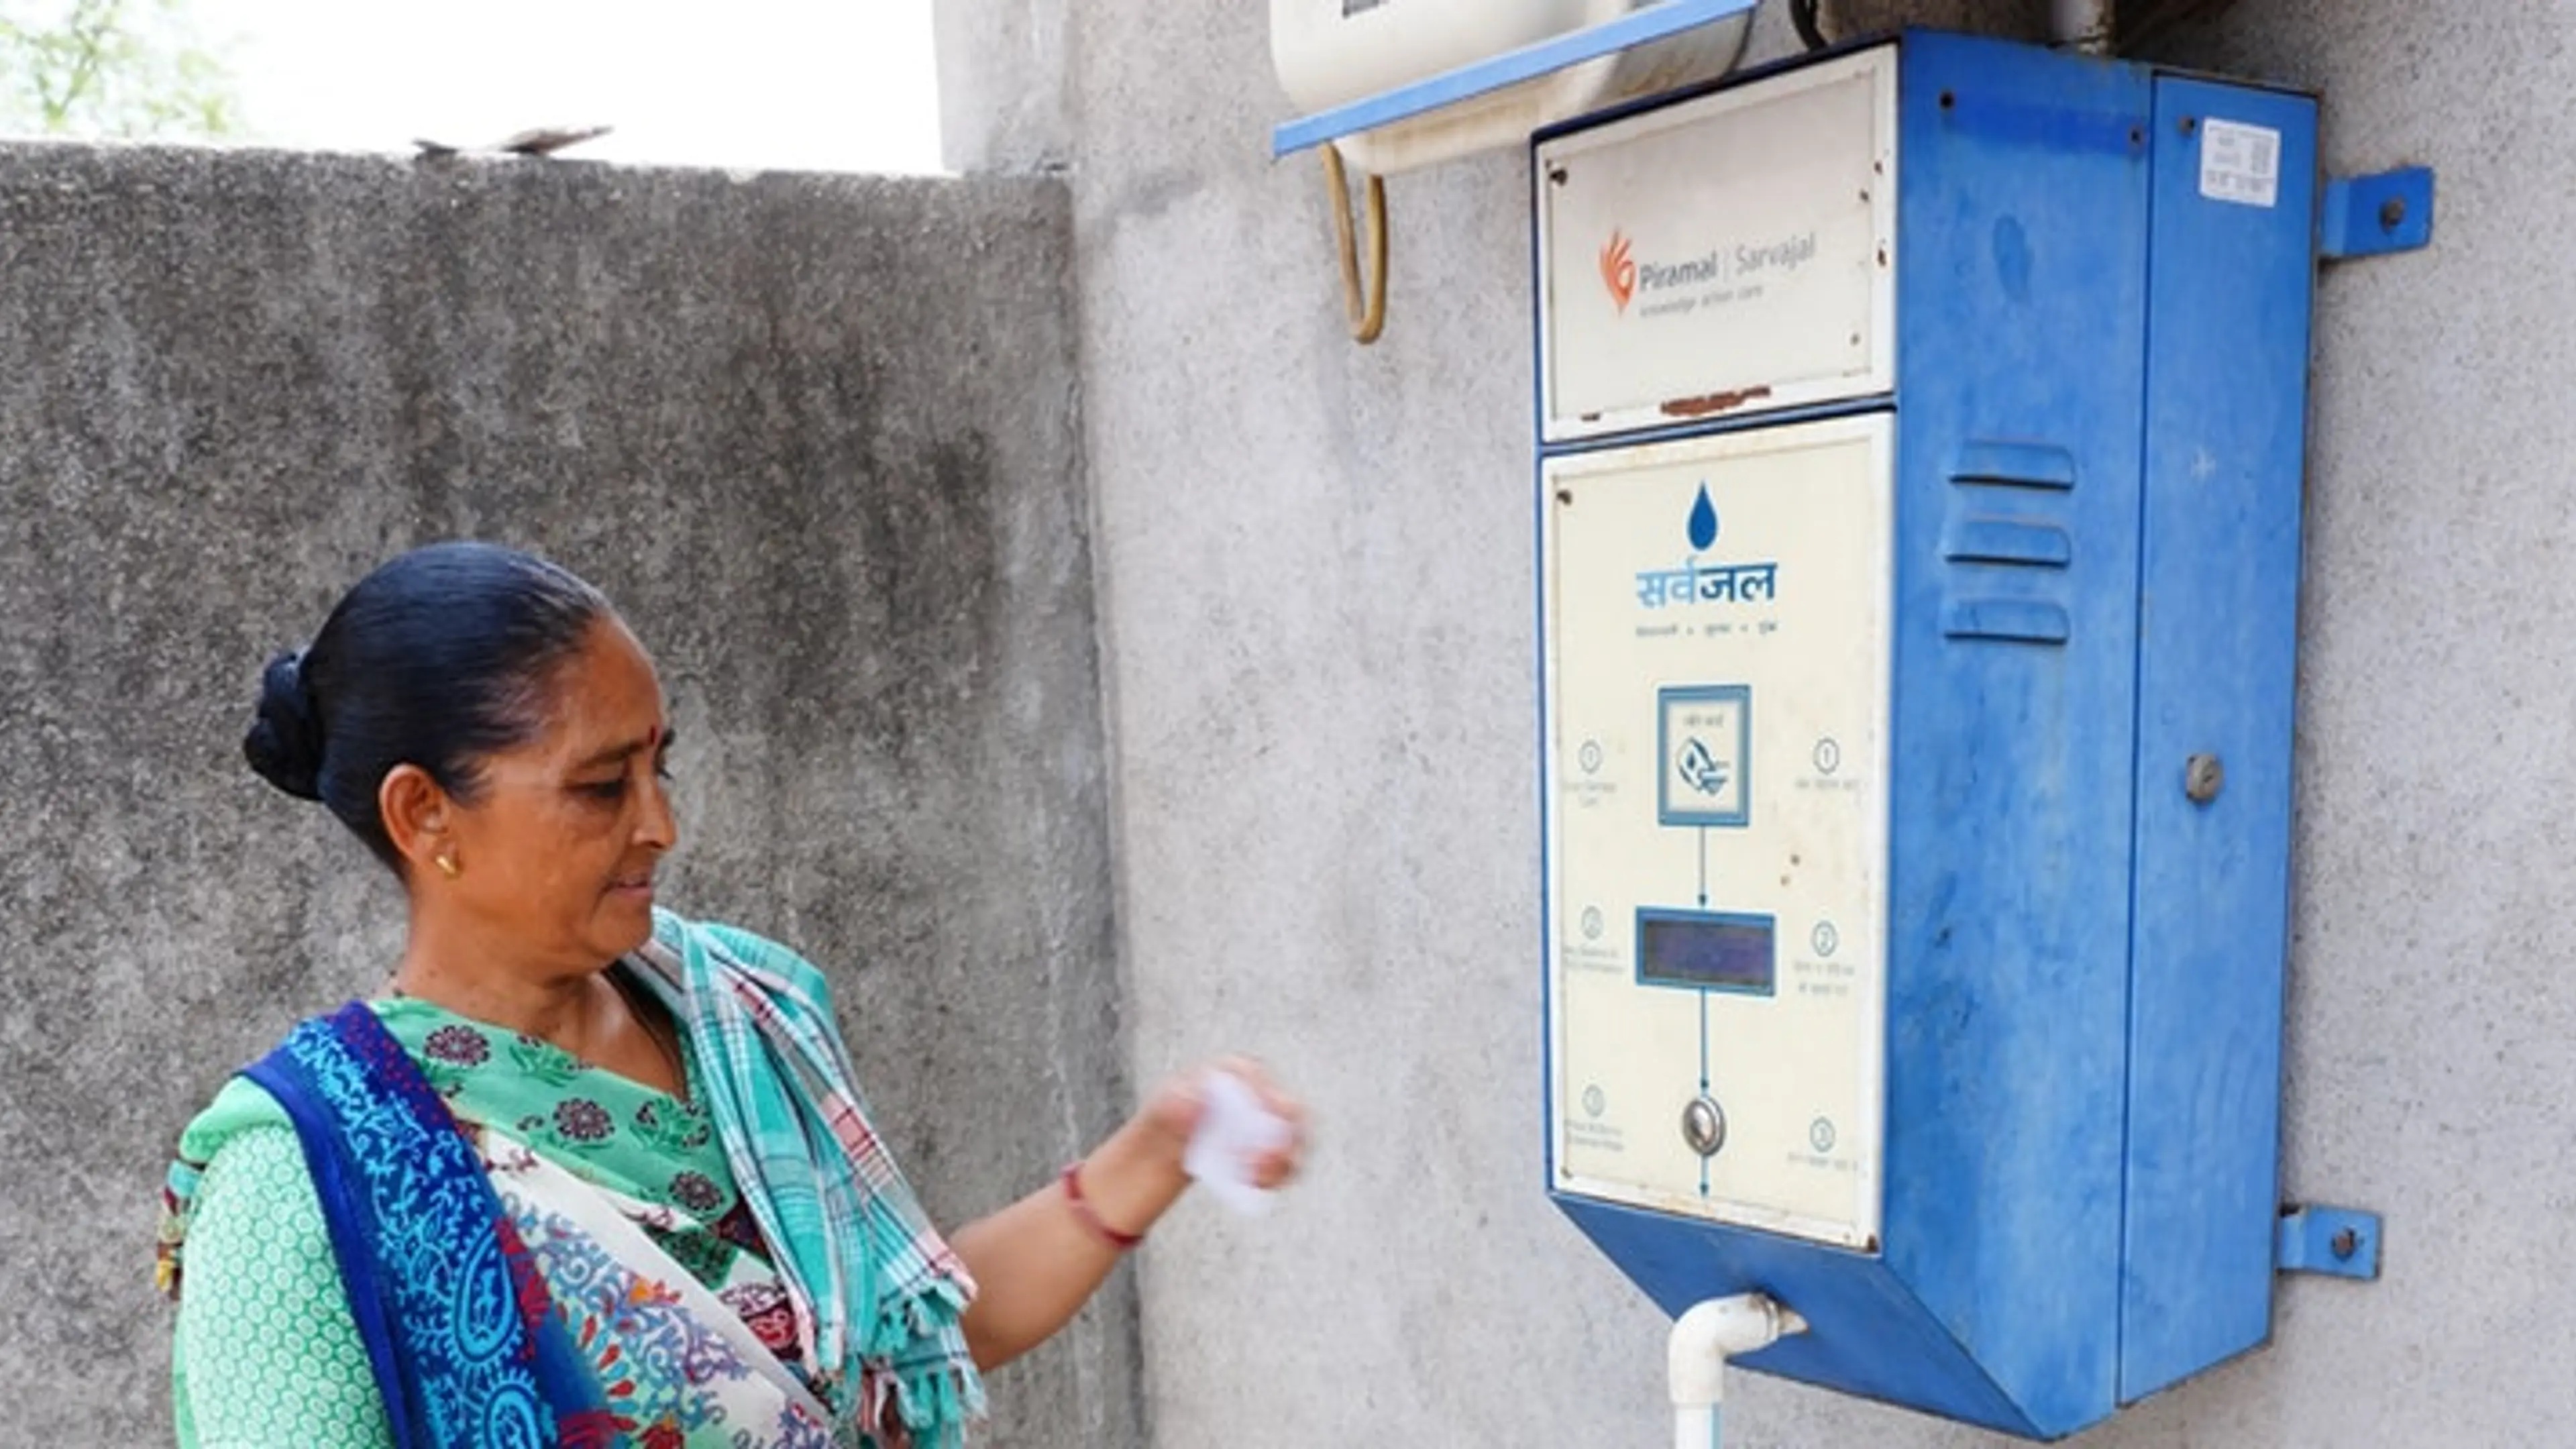 This social enterprise has made potable water accessible in 405 villages across 20 states in India